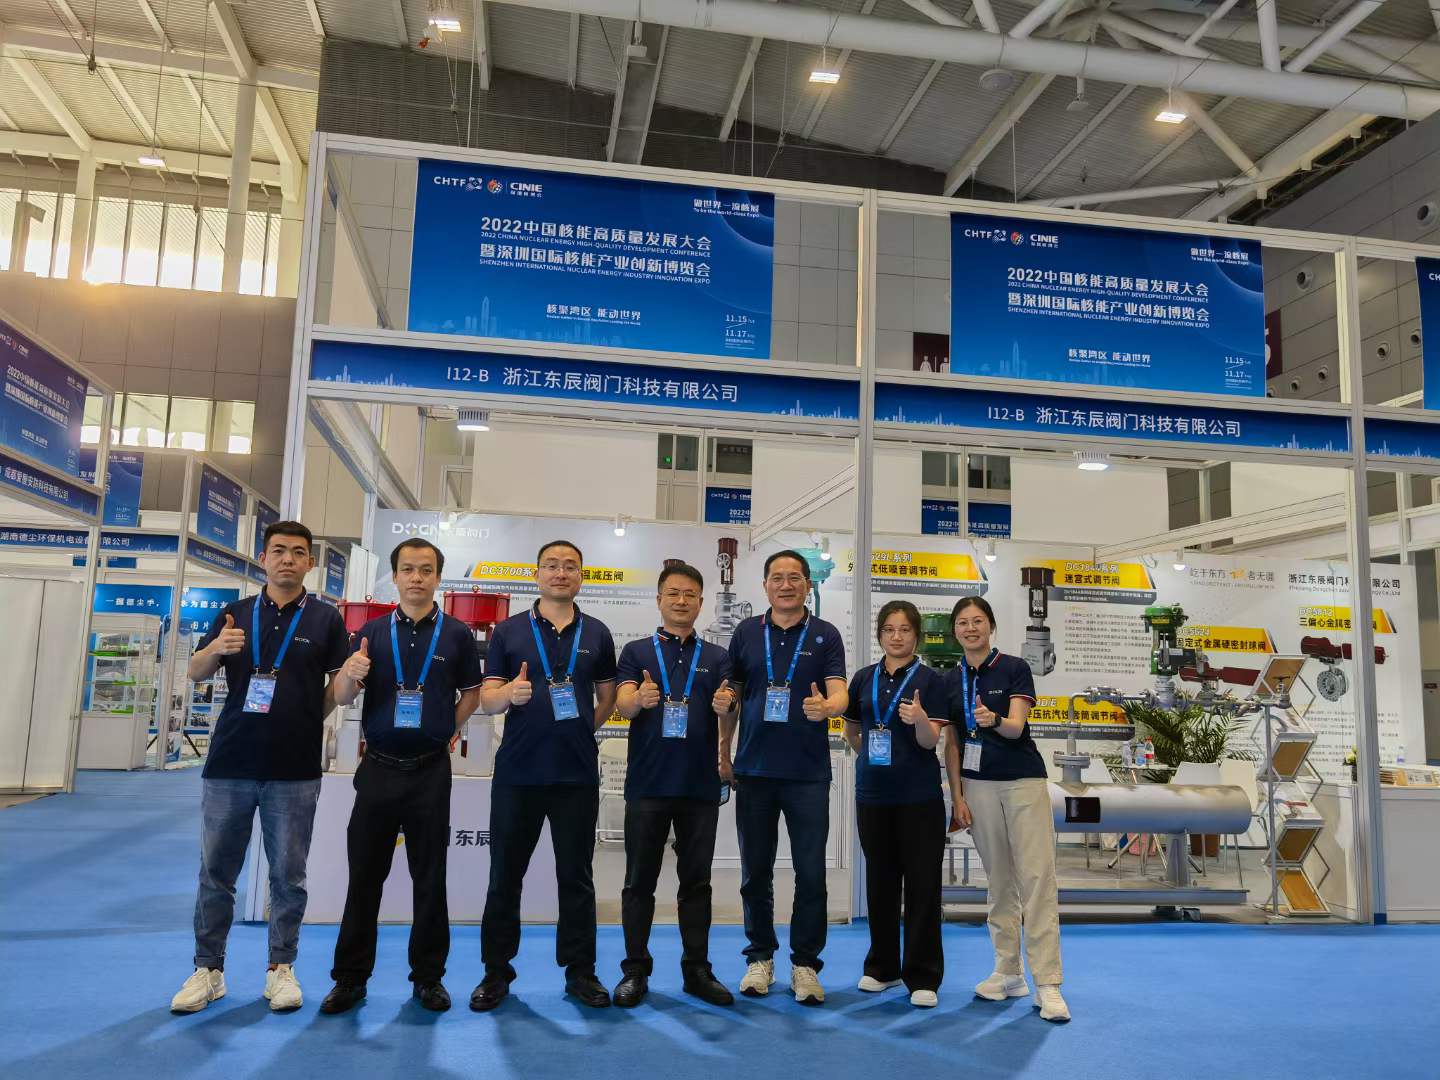 Warmly Congratulate the Grand Opening of the 2022 China Nuclear Energy High Quality Development Conference and Shenzhen International Nuclear Energy Industry Innovation Expo!